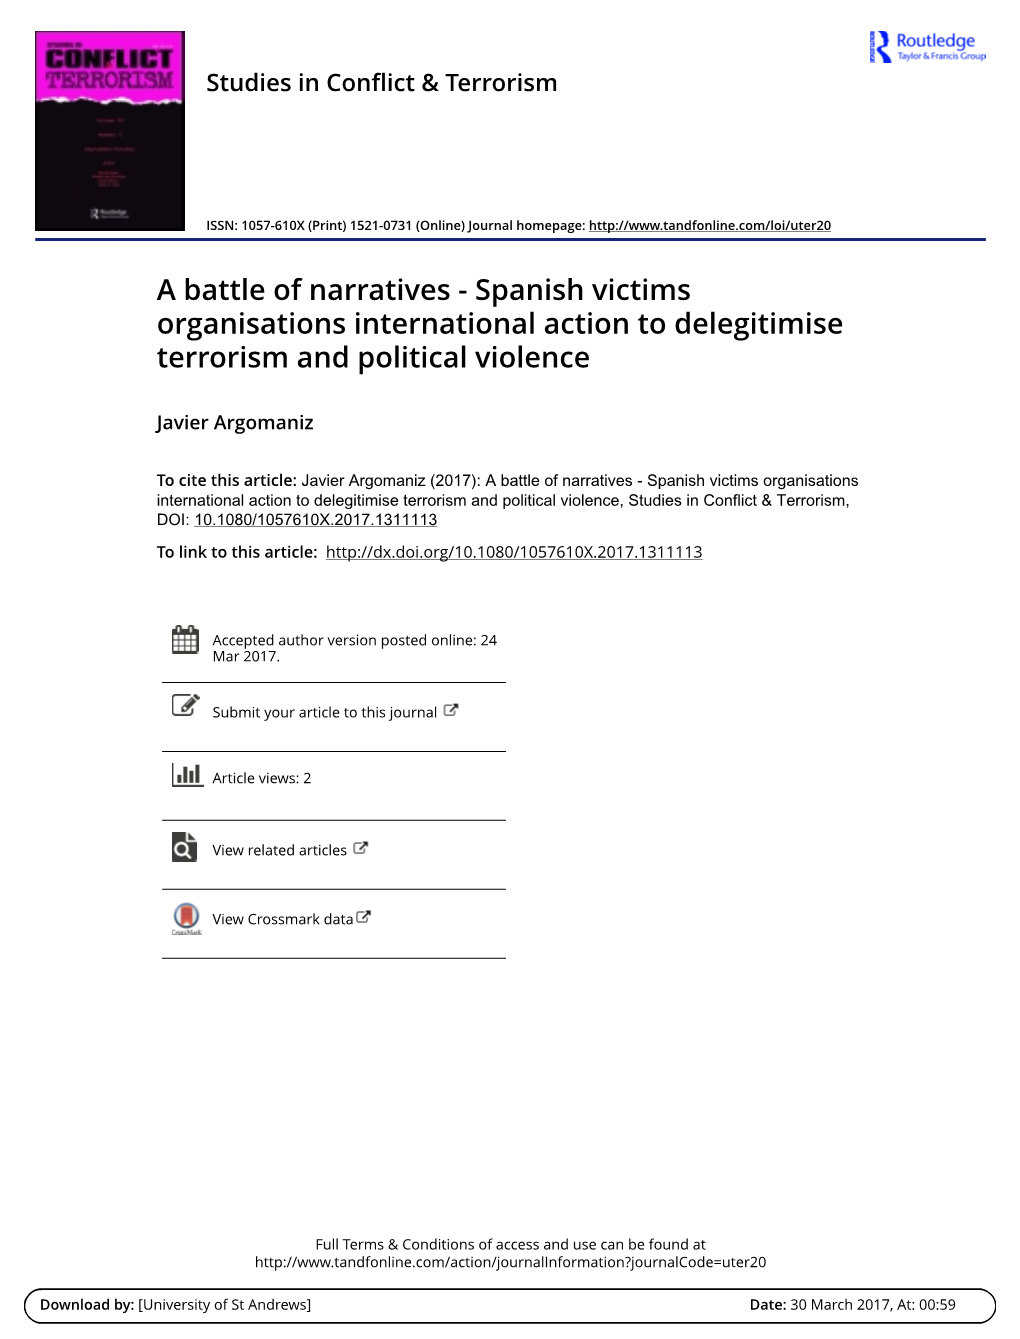 Spanish Victims Organisations International Action to Delegitimise Terrorism and Political Violence